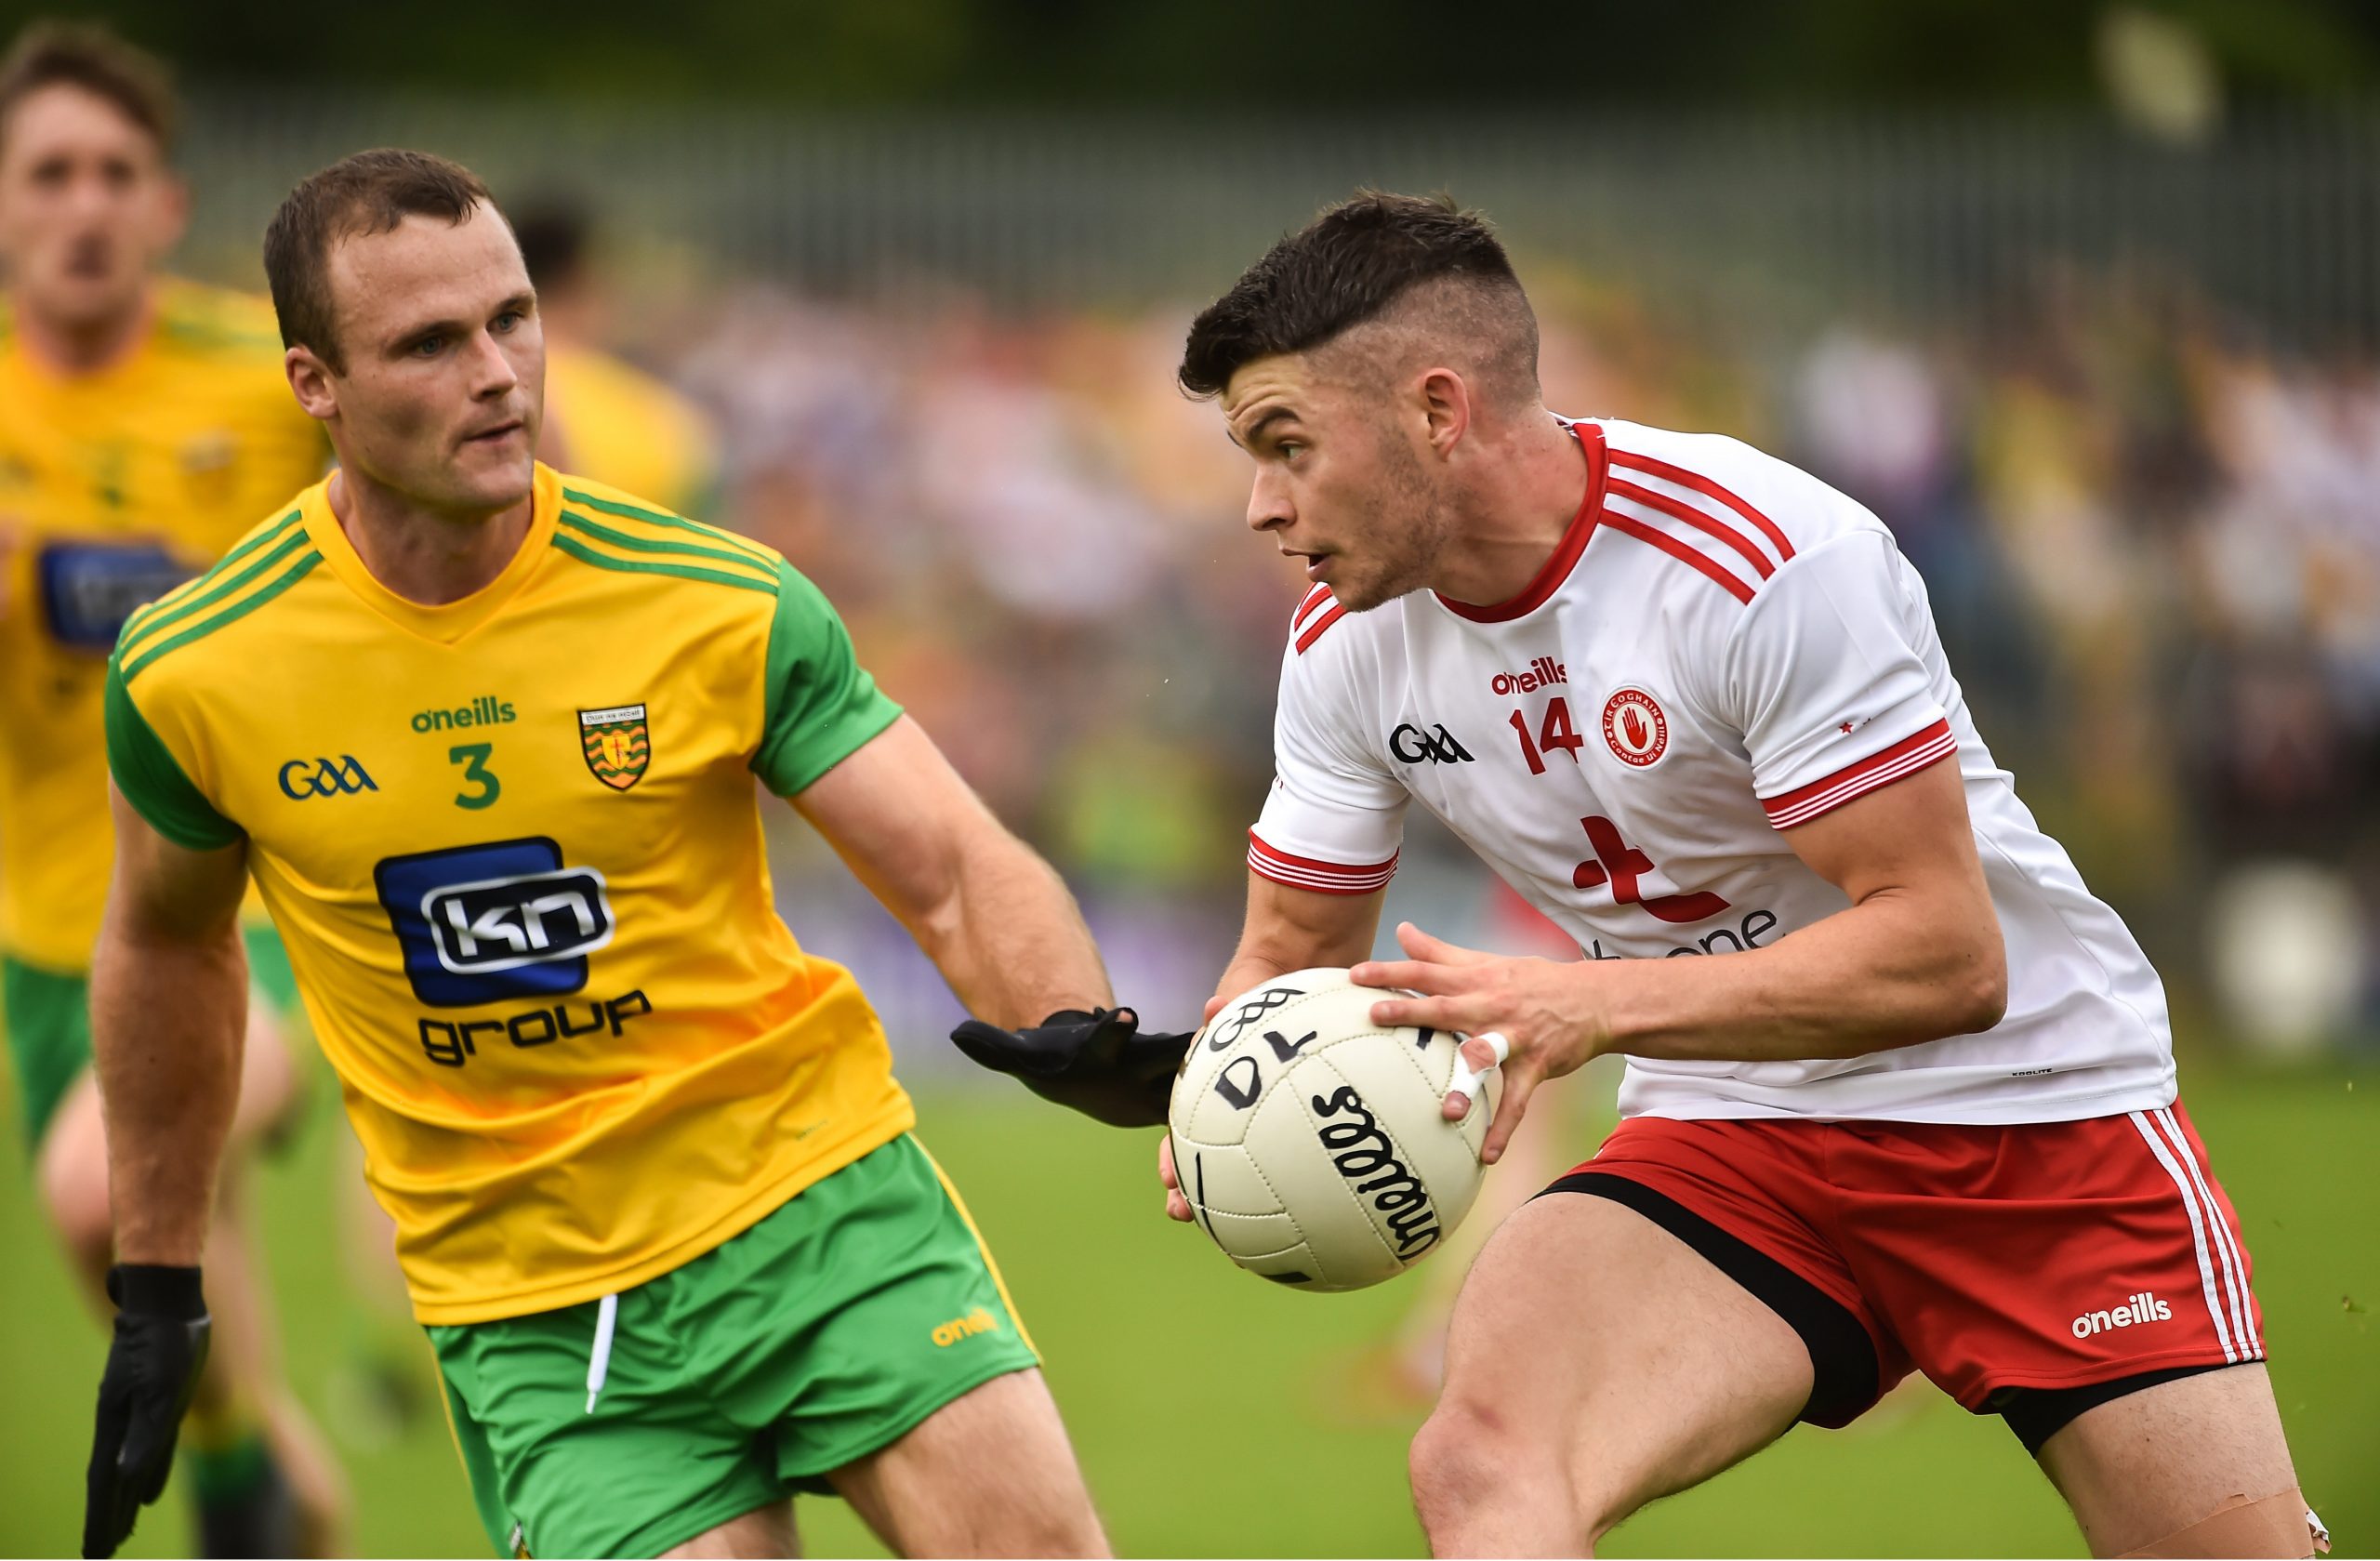 PREVIEW: Donegal and Tyrone to clash in eagerly anticipated Ulster semi-final